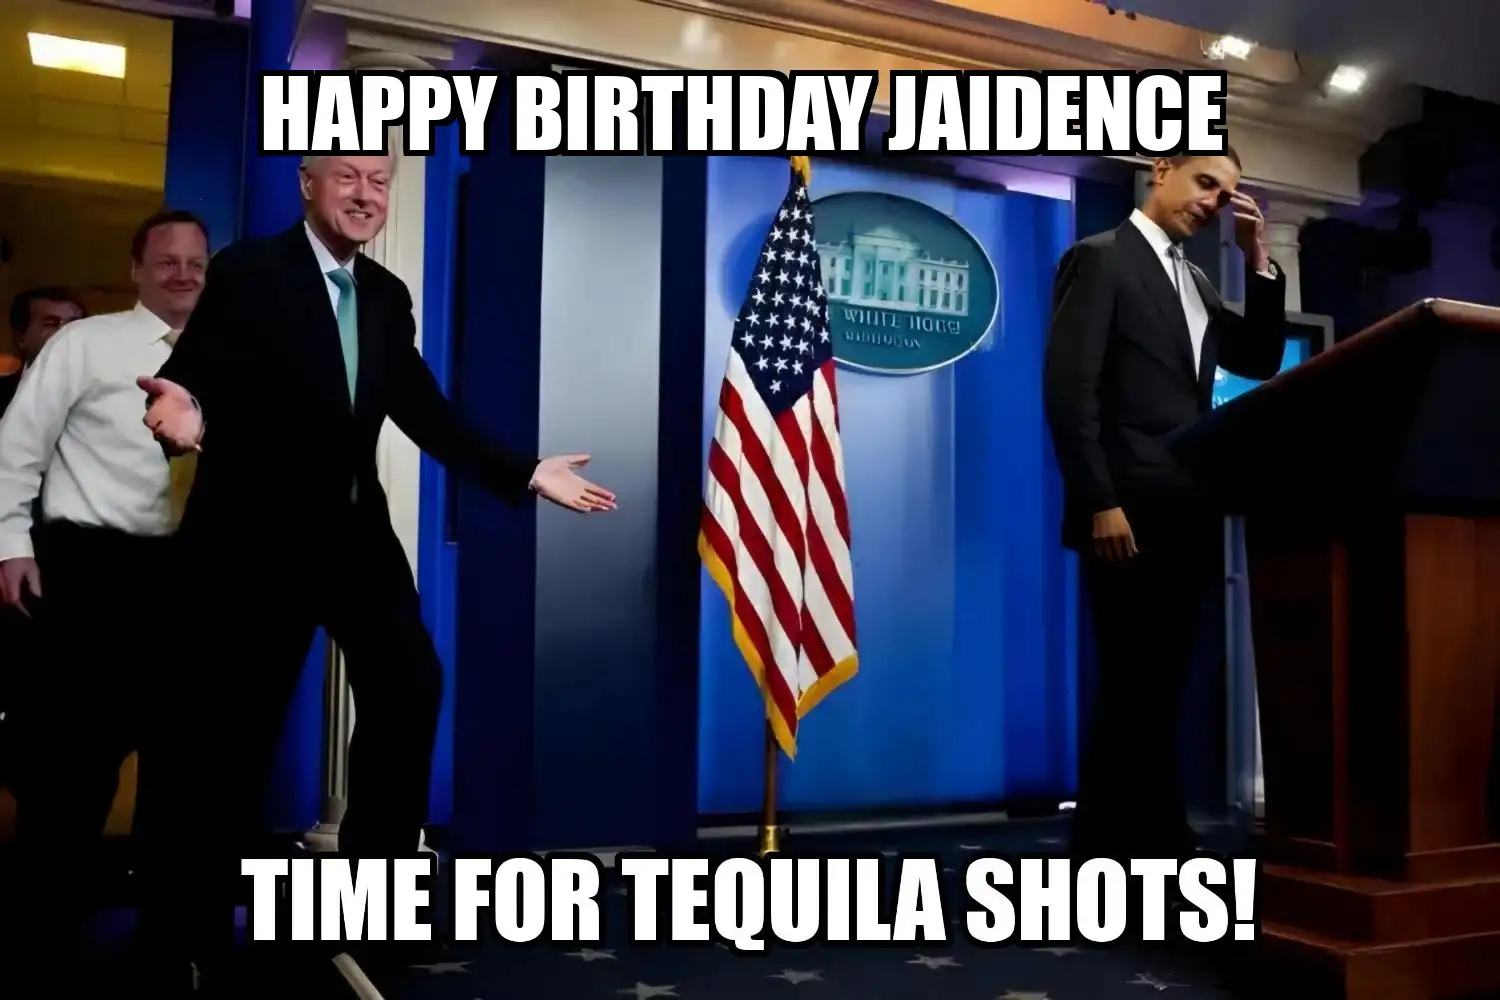 Happy Birthday Jaidence Time For Tequila Shots Memes